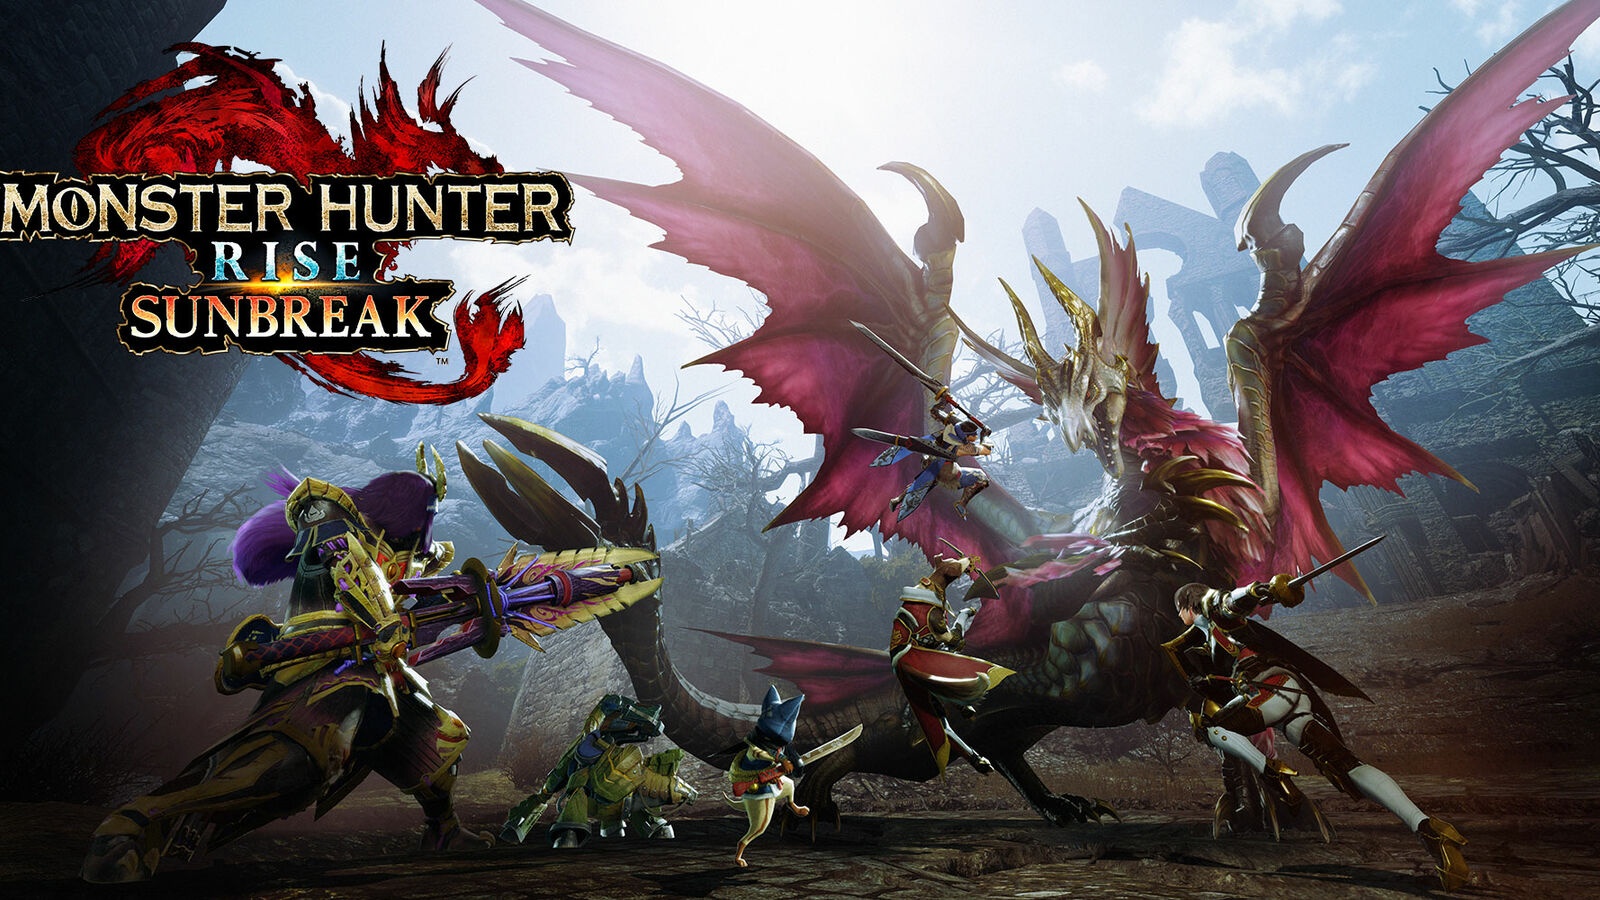 Monster Hunter Rise (PC) review: Slays the Switch original